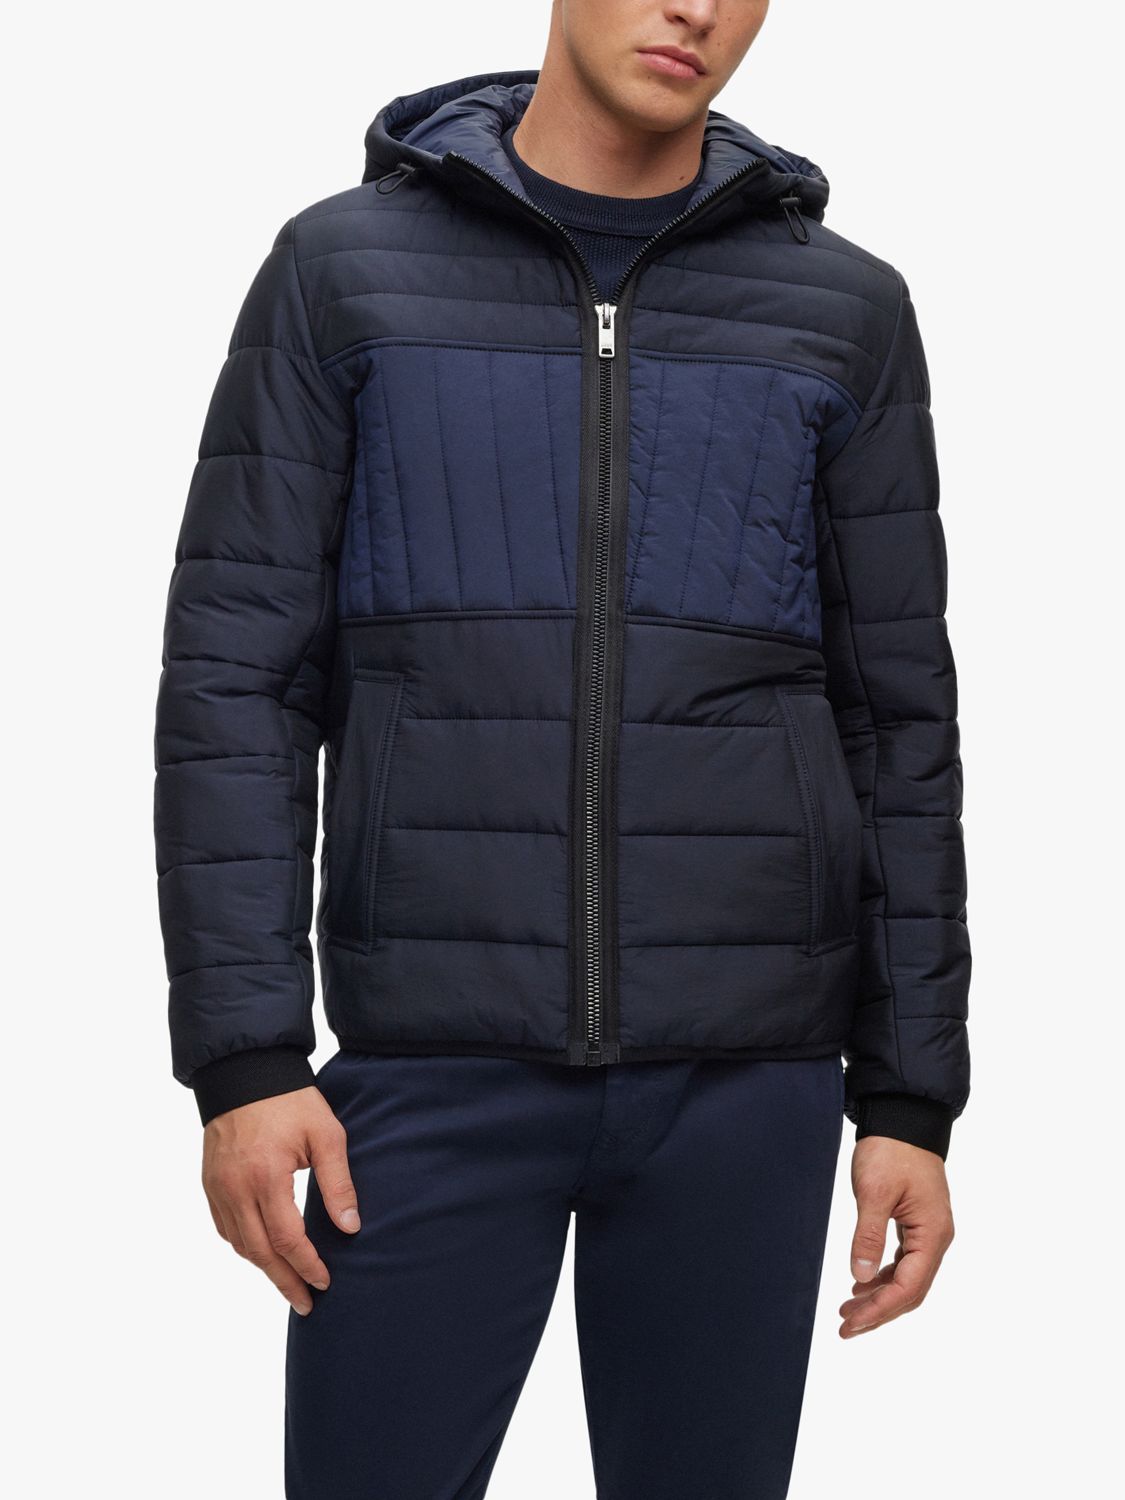 BOSS Omir Quilted Jacket, Dark Blue at John Lewis & Partners